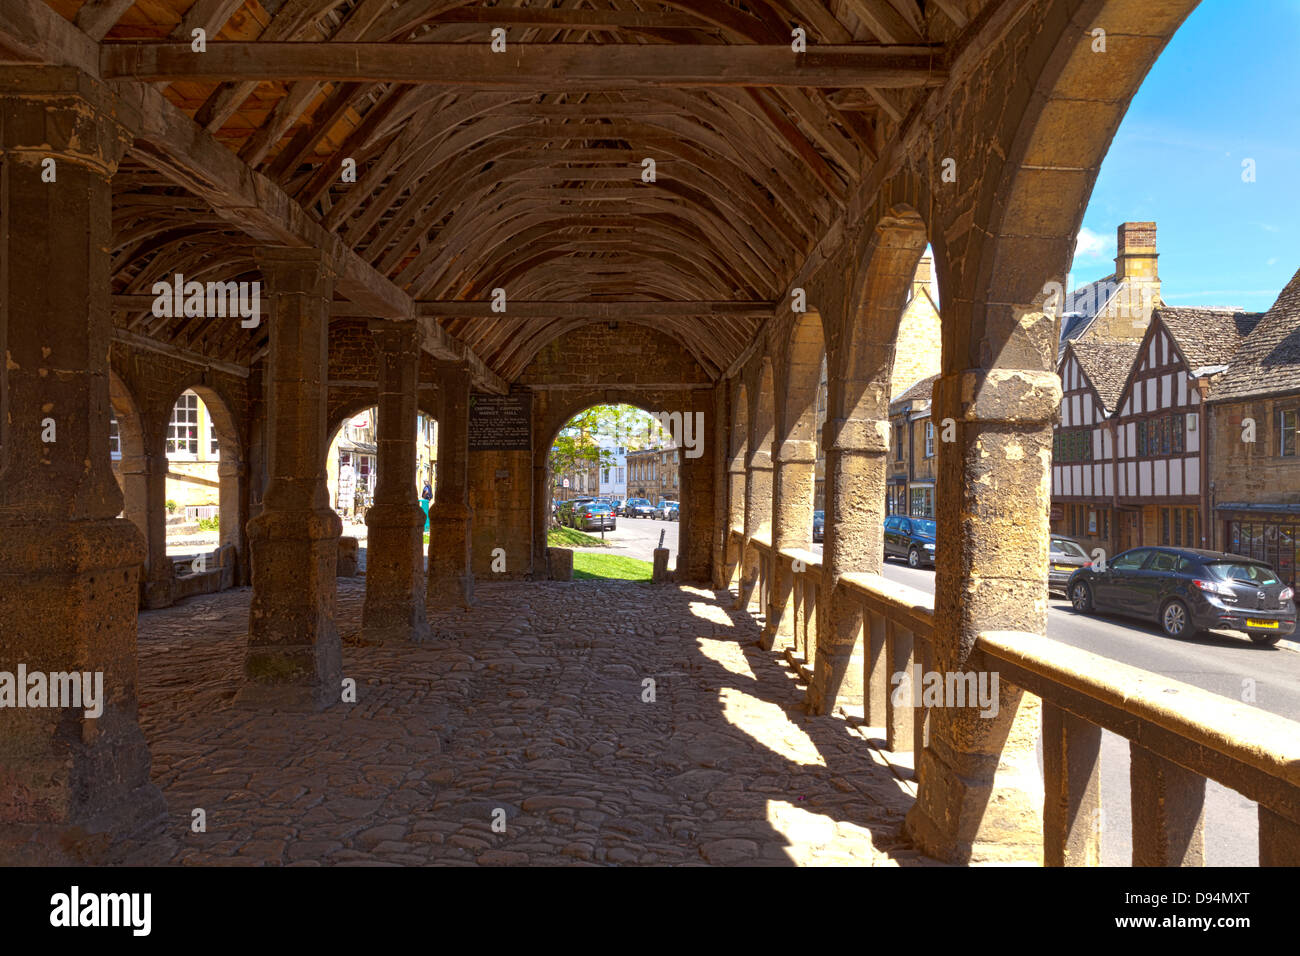 The Market Hall in the Cotswold village of Chipping Campden, Gloucestershire UK Stock Photo